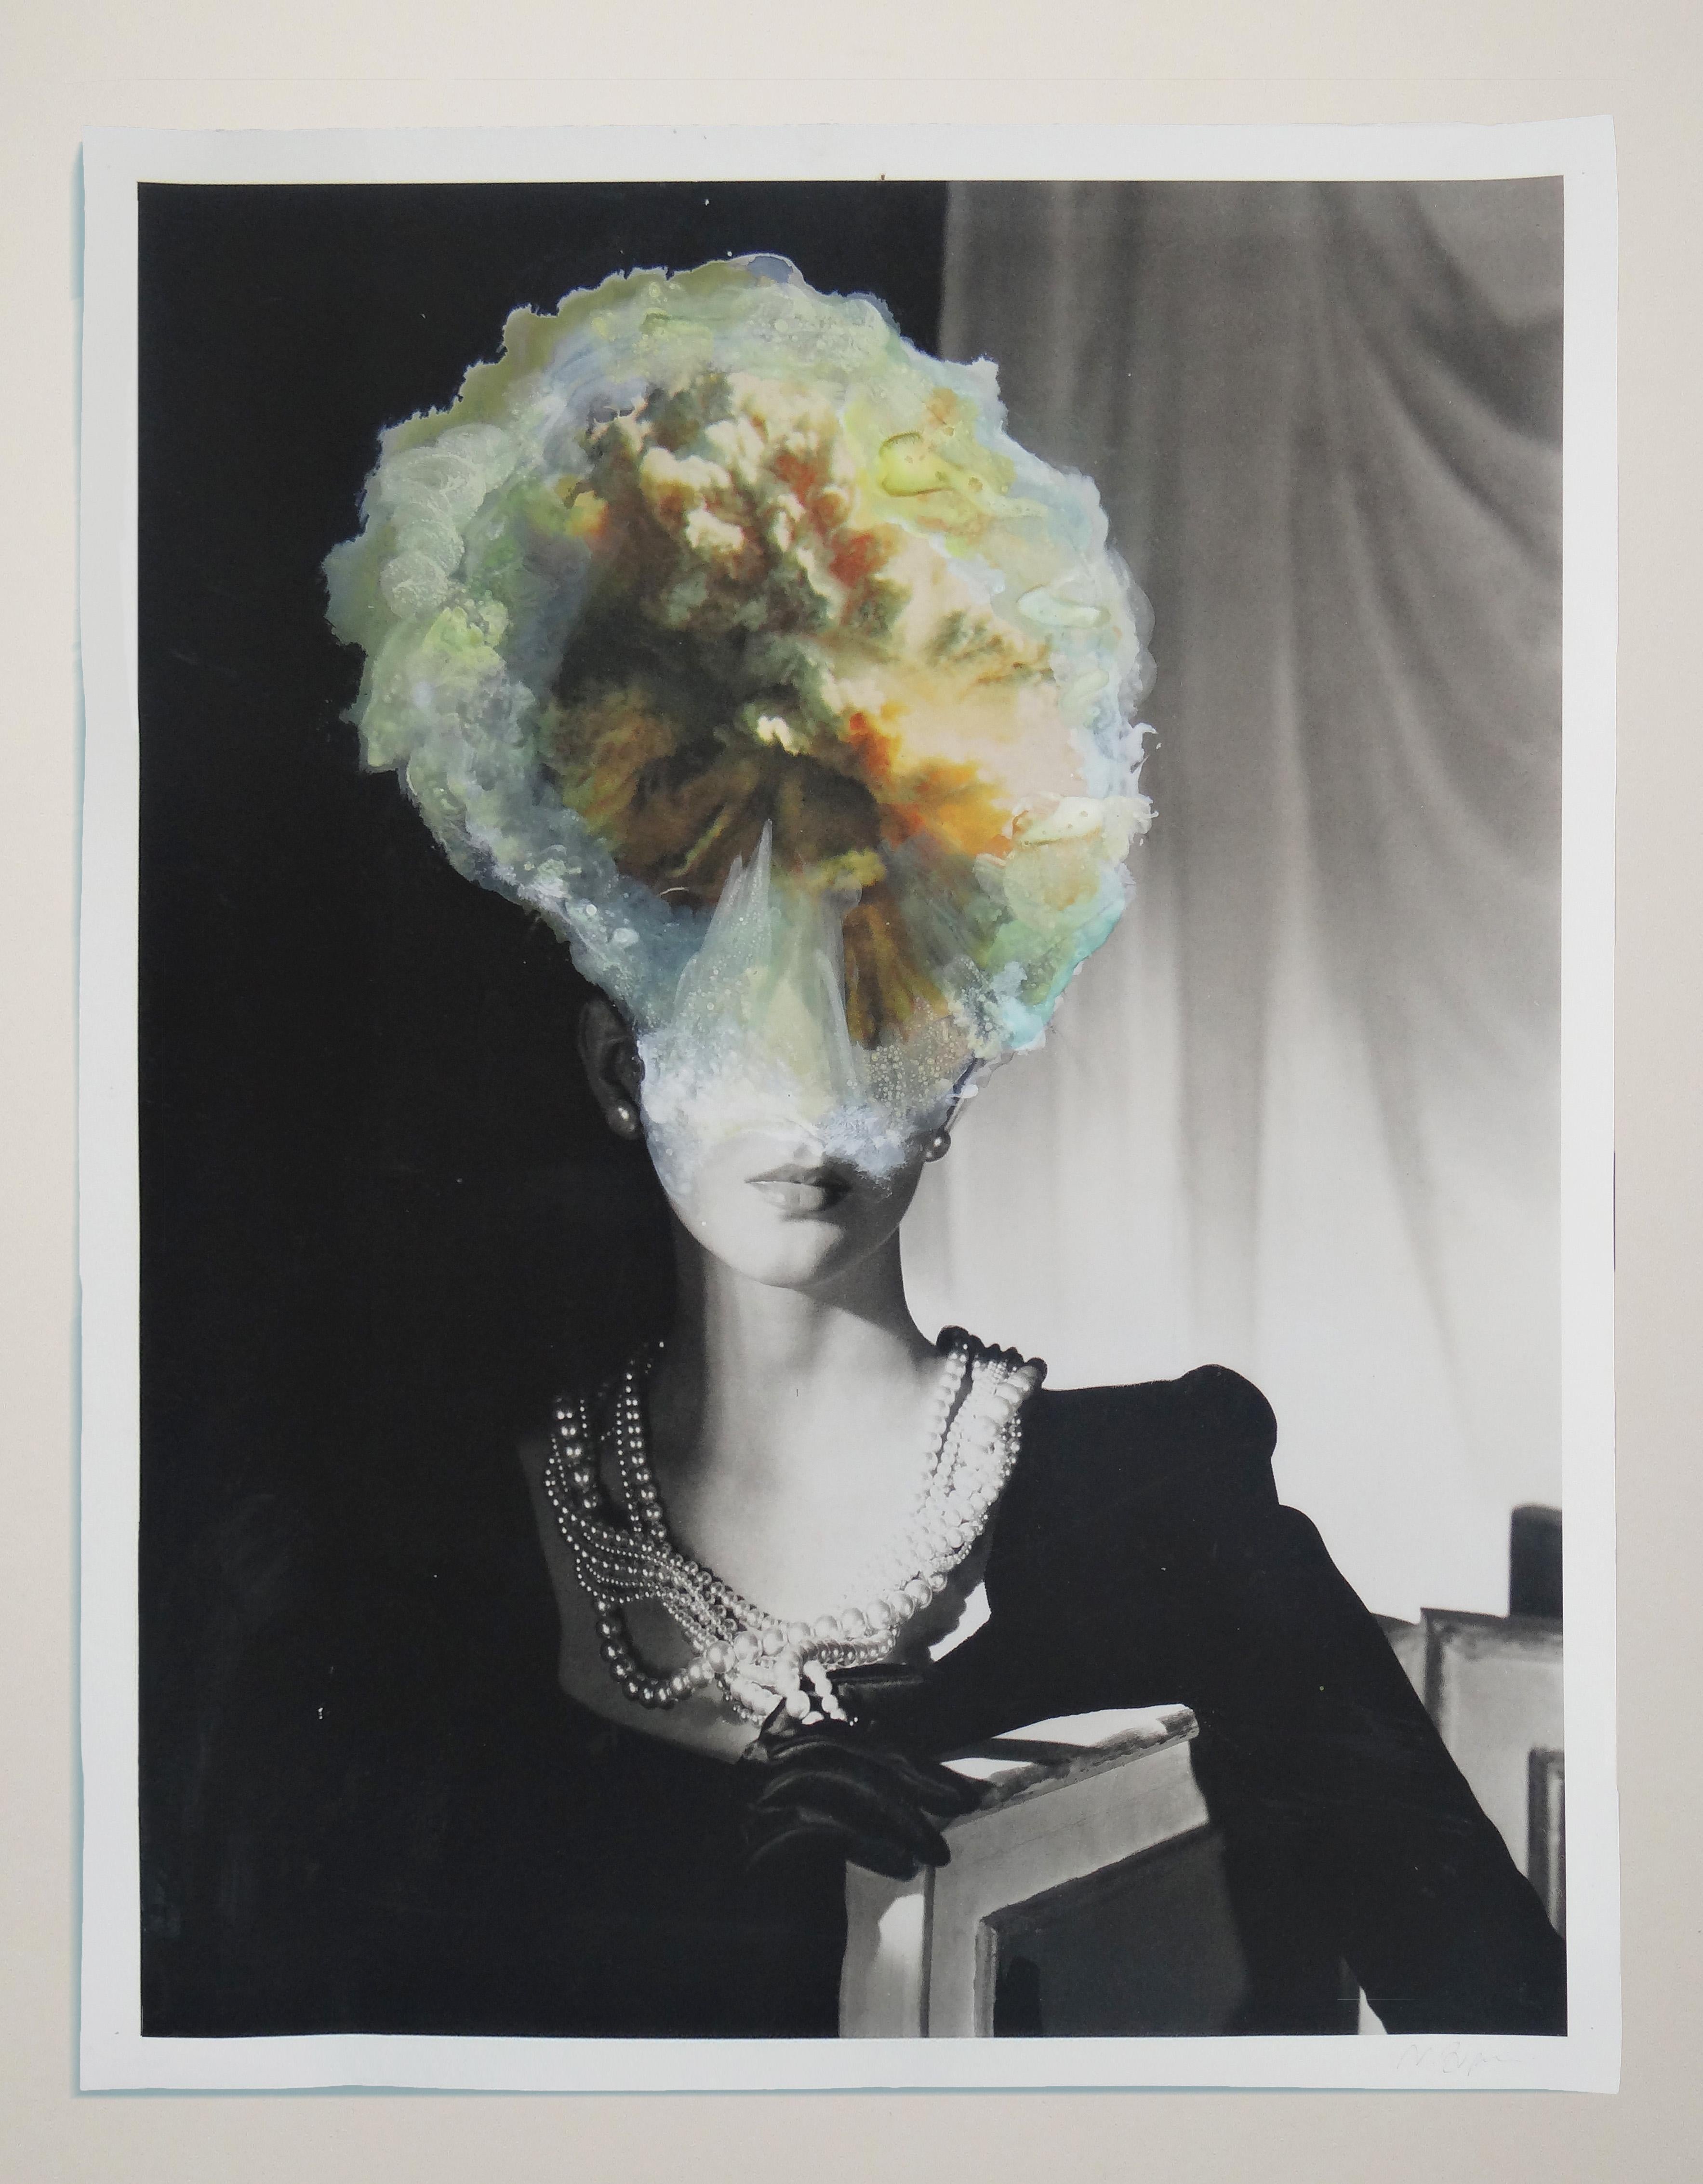 Natasha Zupan Color Photograph - Atoms and Pearls, #2237, Homage to Horst P. Horst collage color photograph